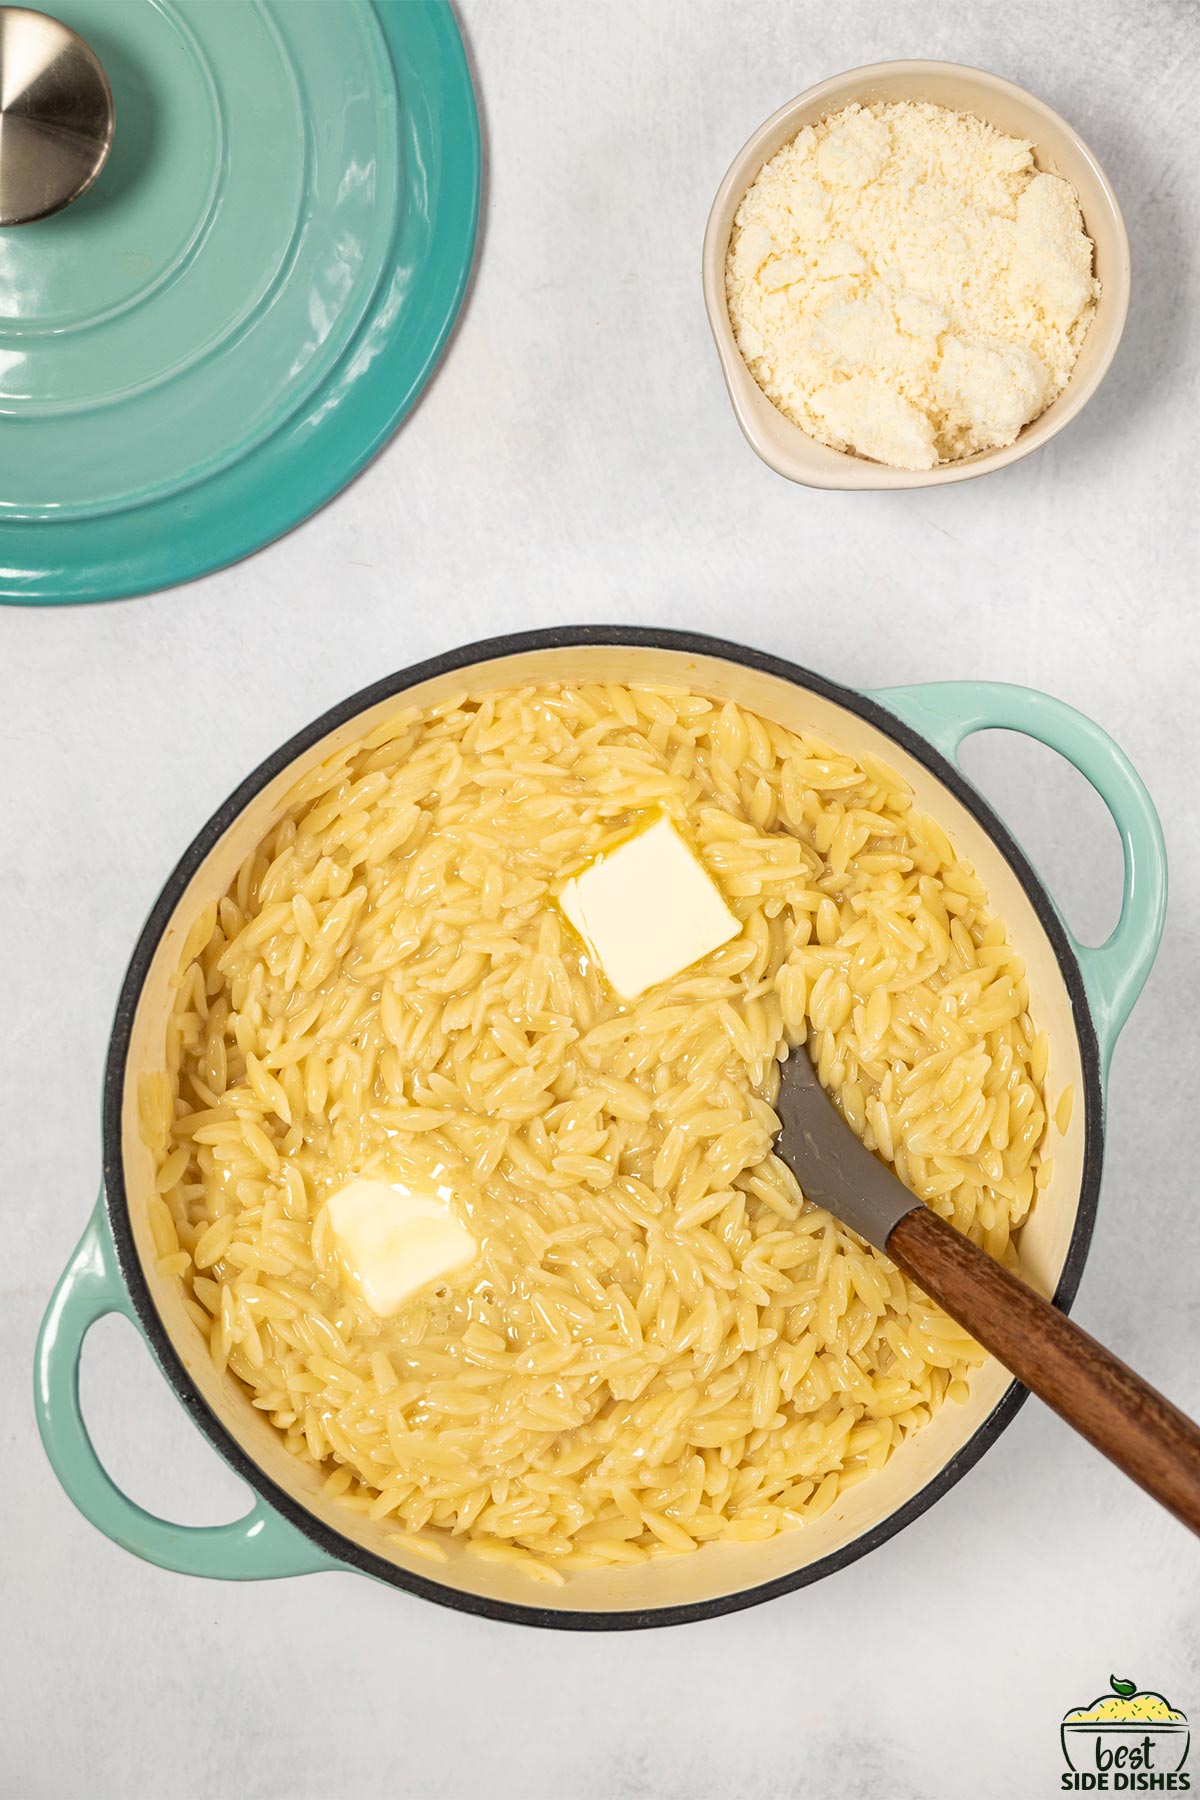 butter added to orzo